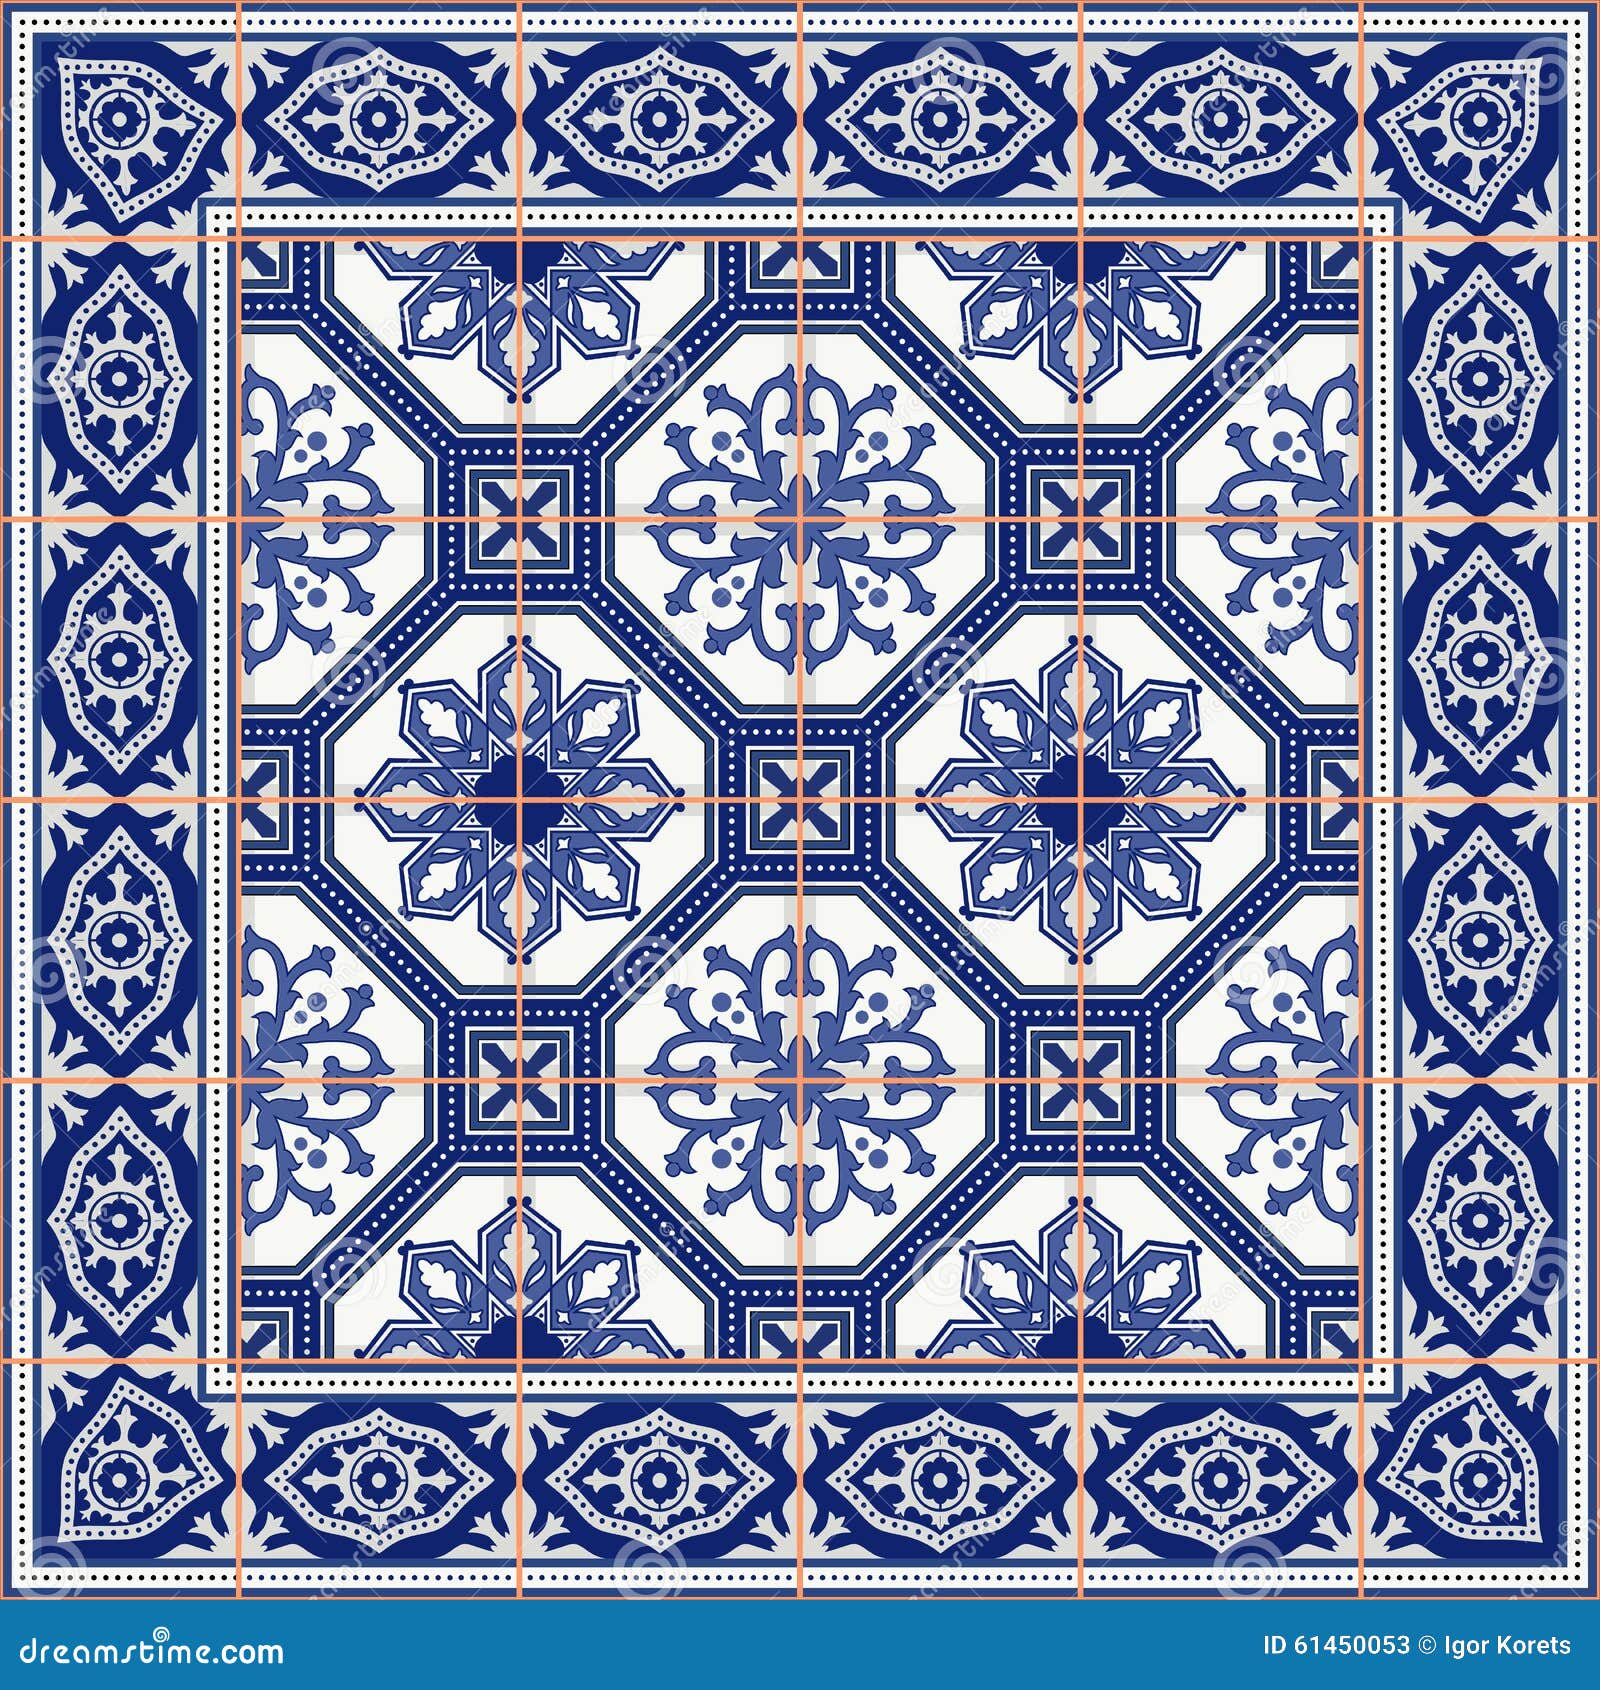 gorgeous seamless pattern from tiles and border. moroccan, portuguese, azulejo ornaments.